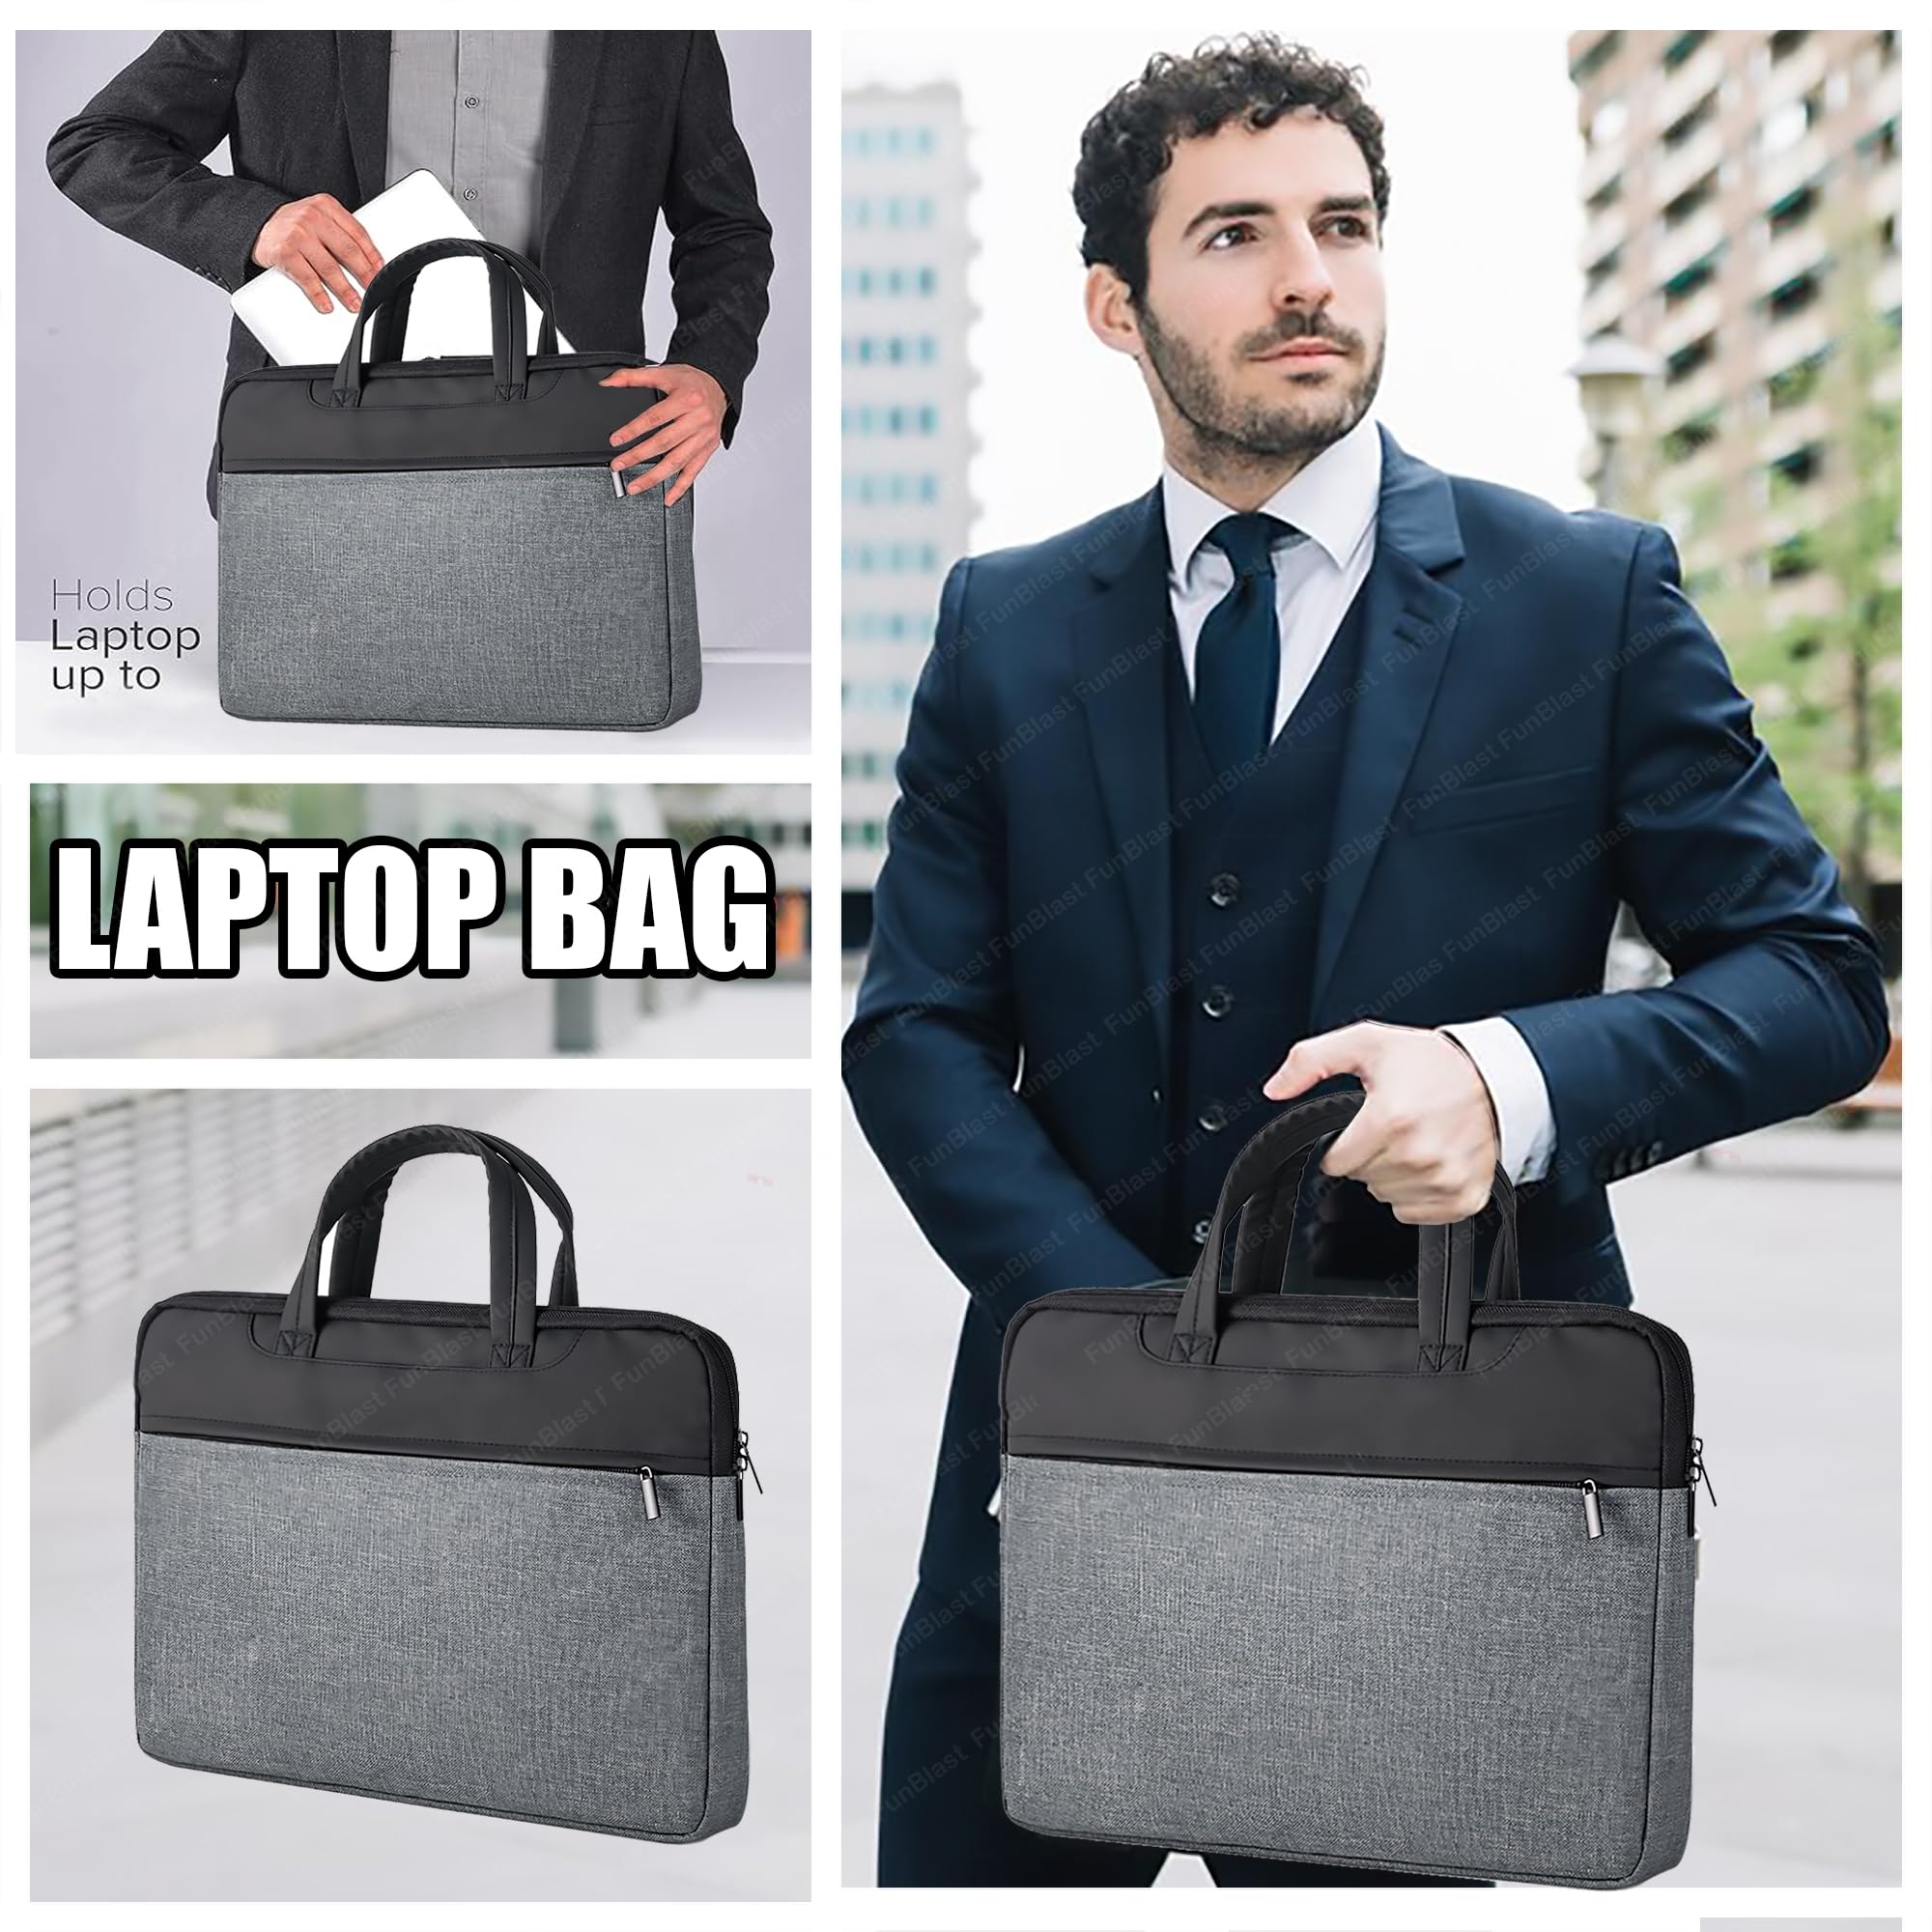 The Professional Office Laptop Bag - Protecta